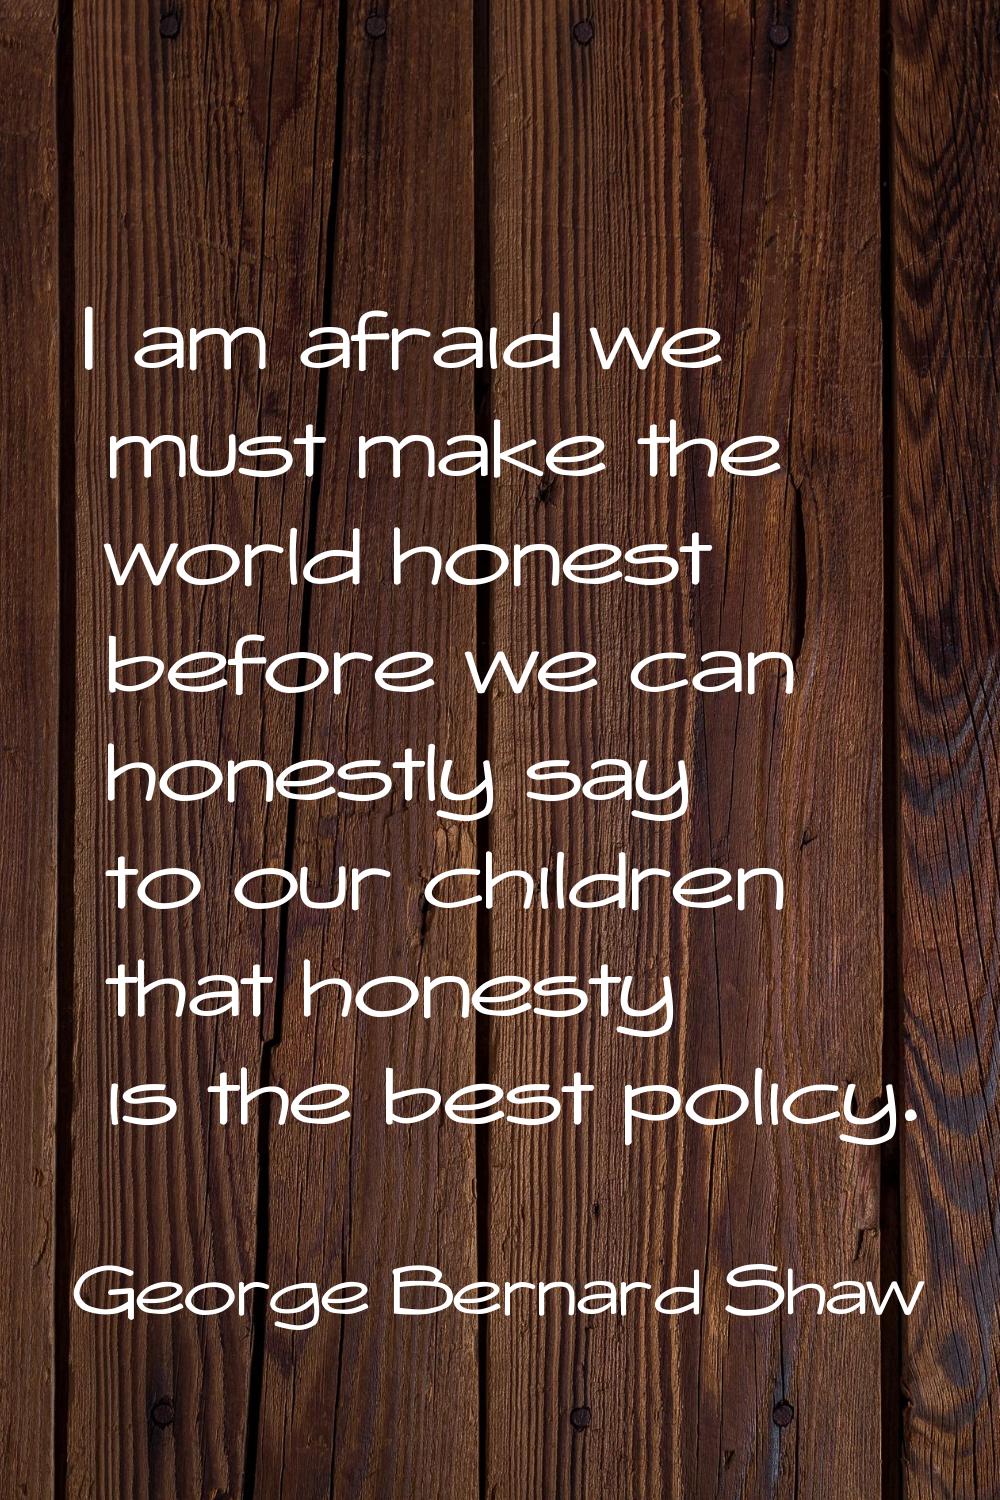 I am afraid we must make the world honest before we can honestly say to our children that honesty i